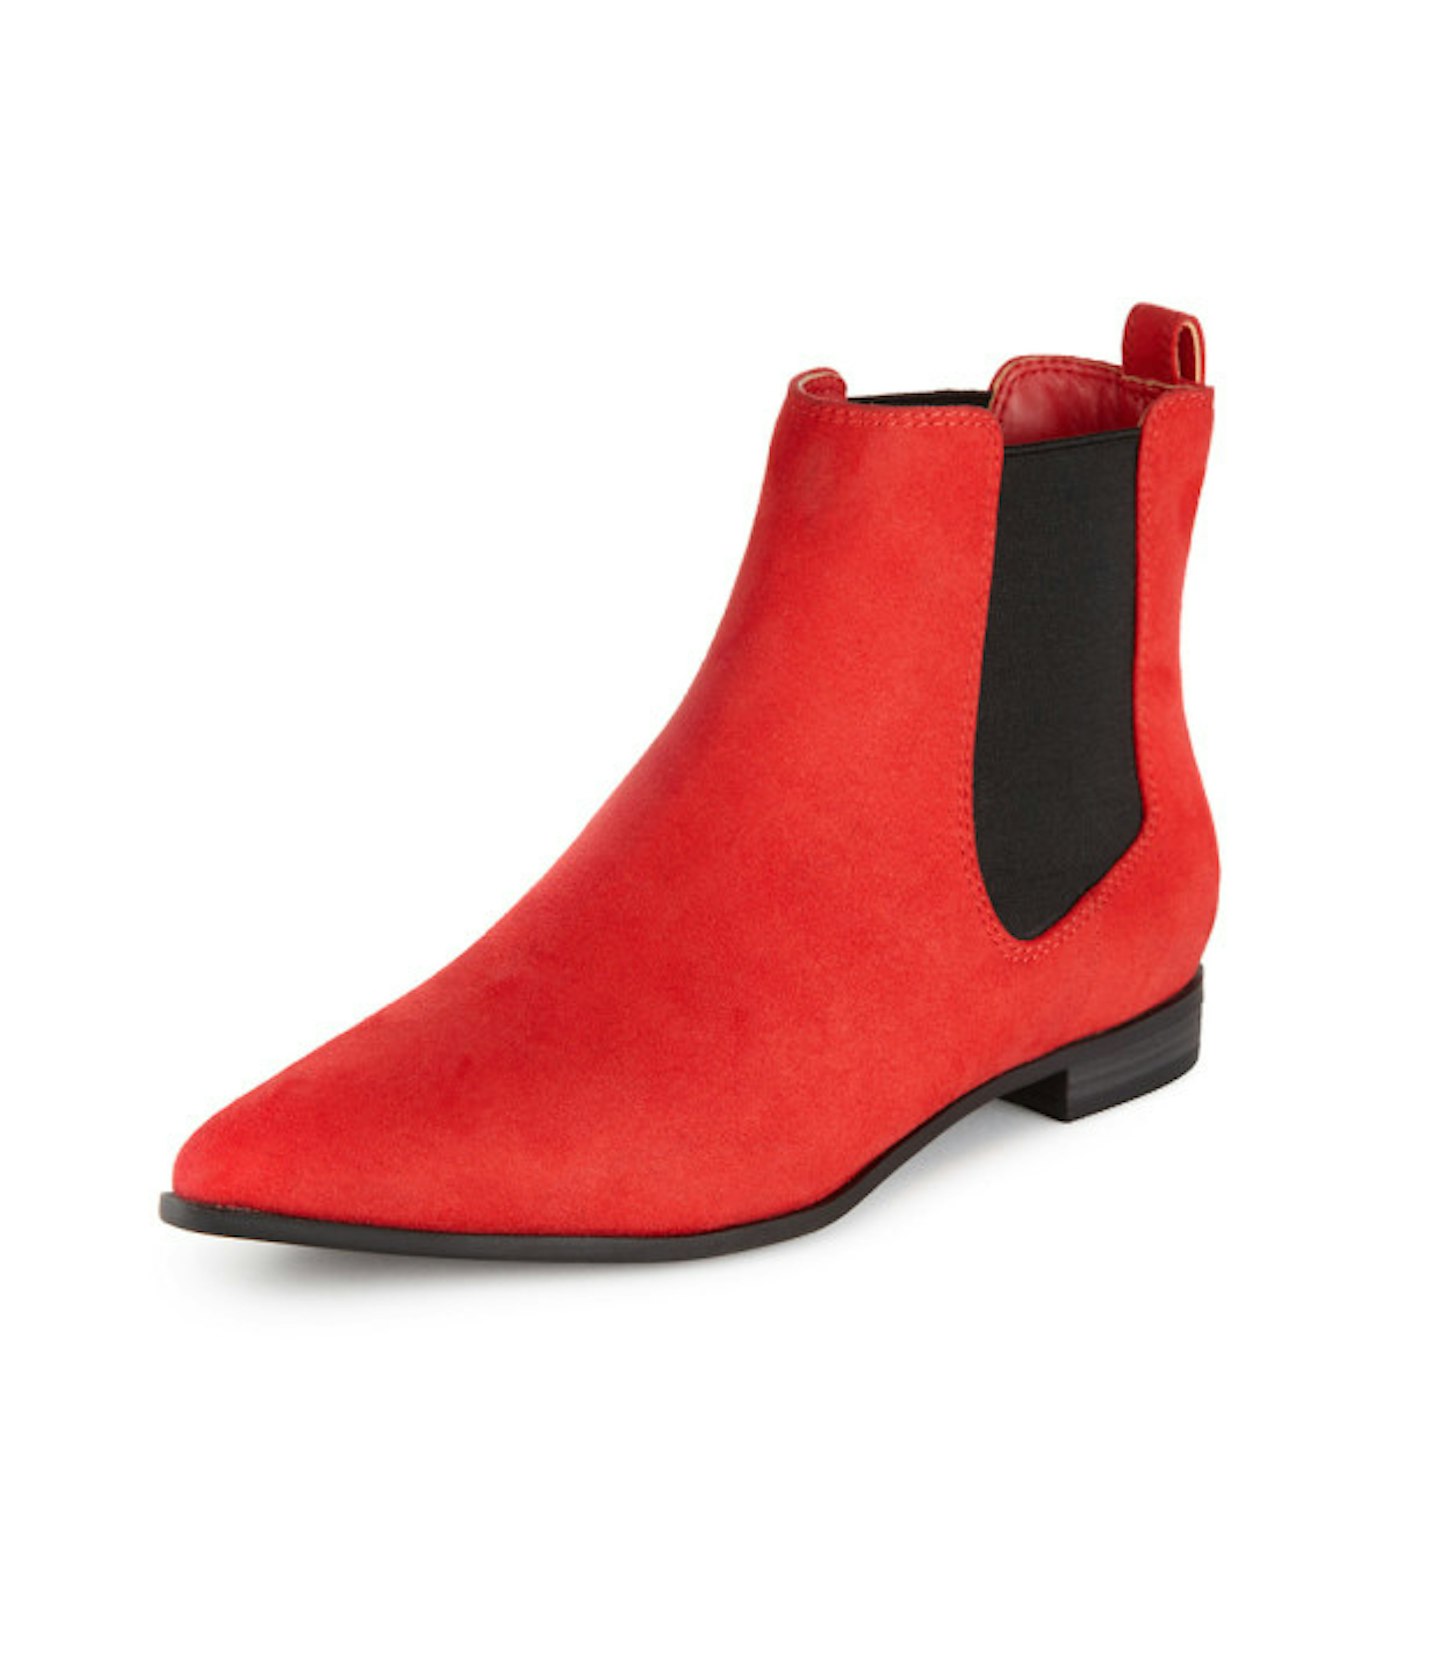 six-o-clock-shoes-red-chelsea-boots